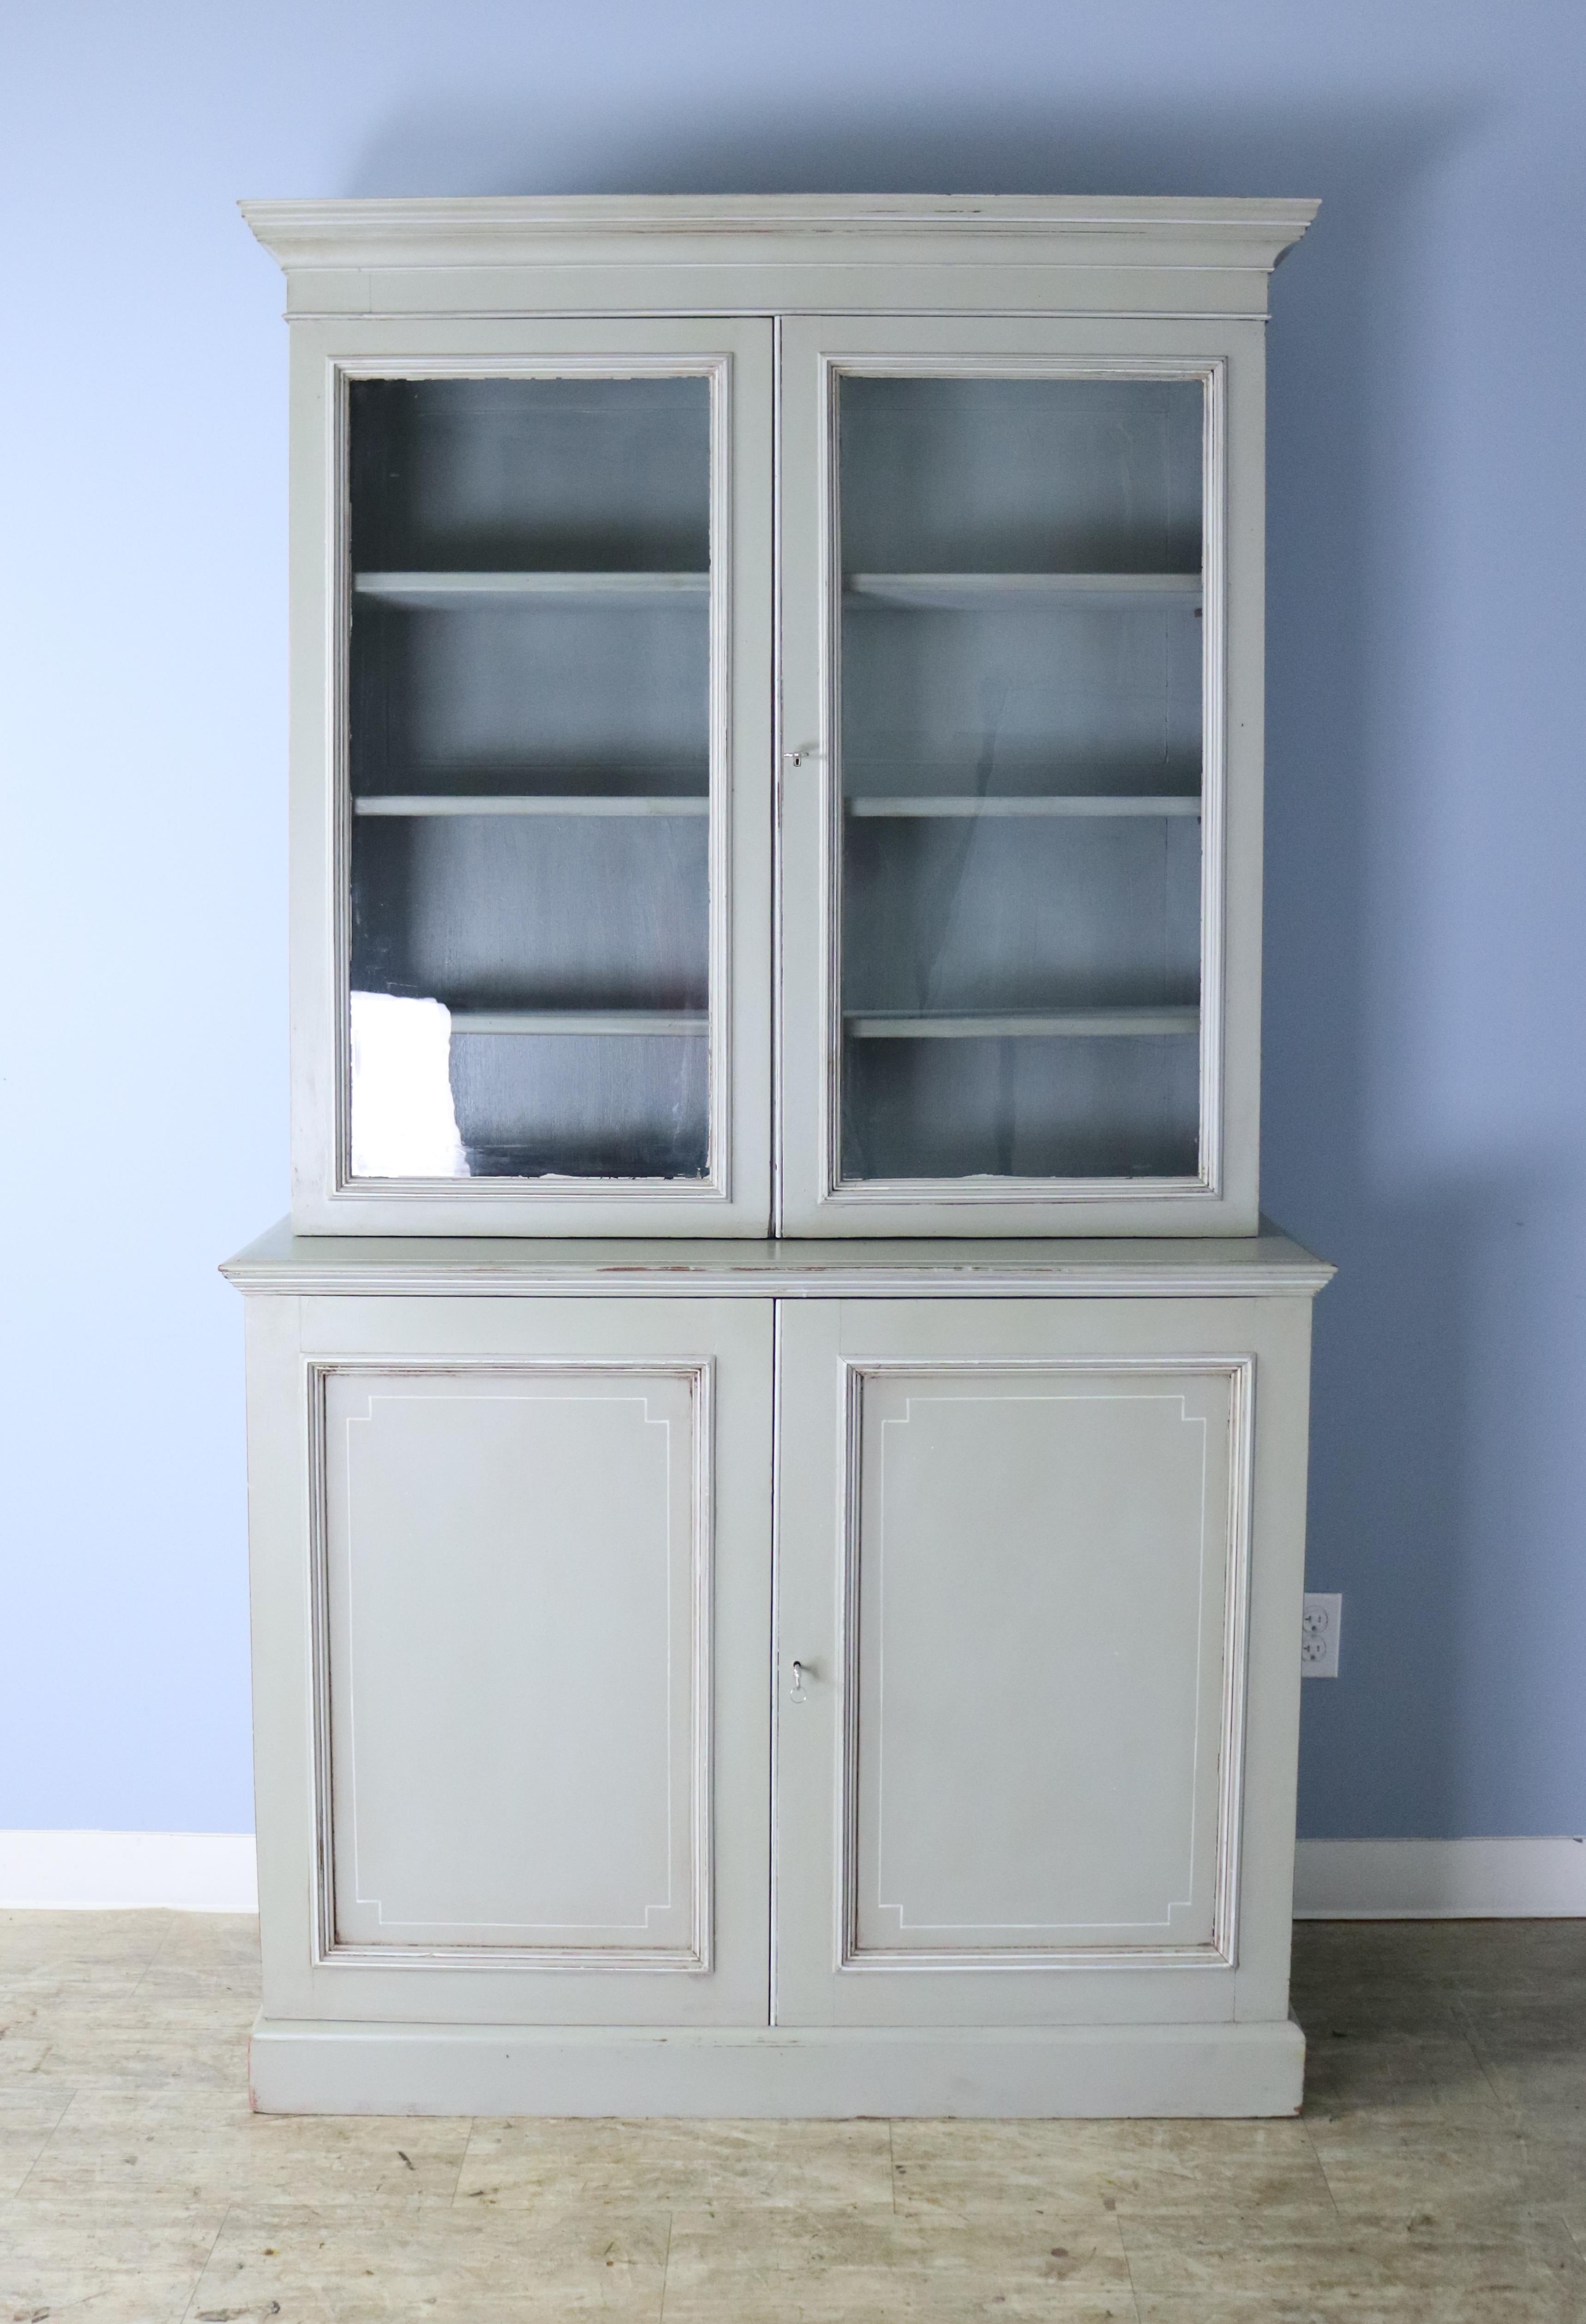 A two piece bookcase or cabinet from the later half of the 19th century but newly painted a pale green in the Regency style with faux distress. Both the top section and the bottom have non adjustable shelves with plenty of good storage. The bottom